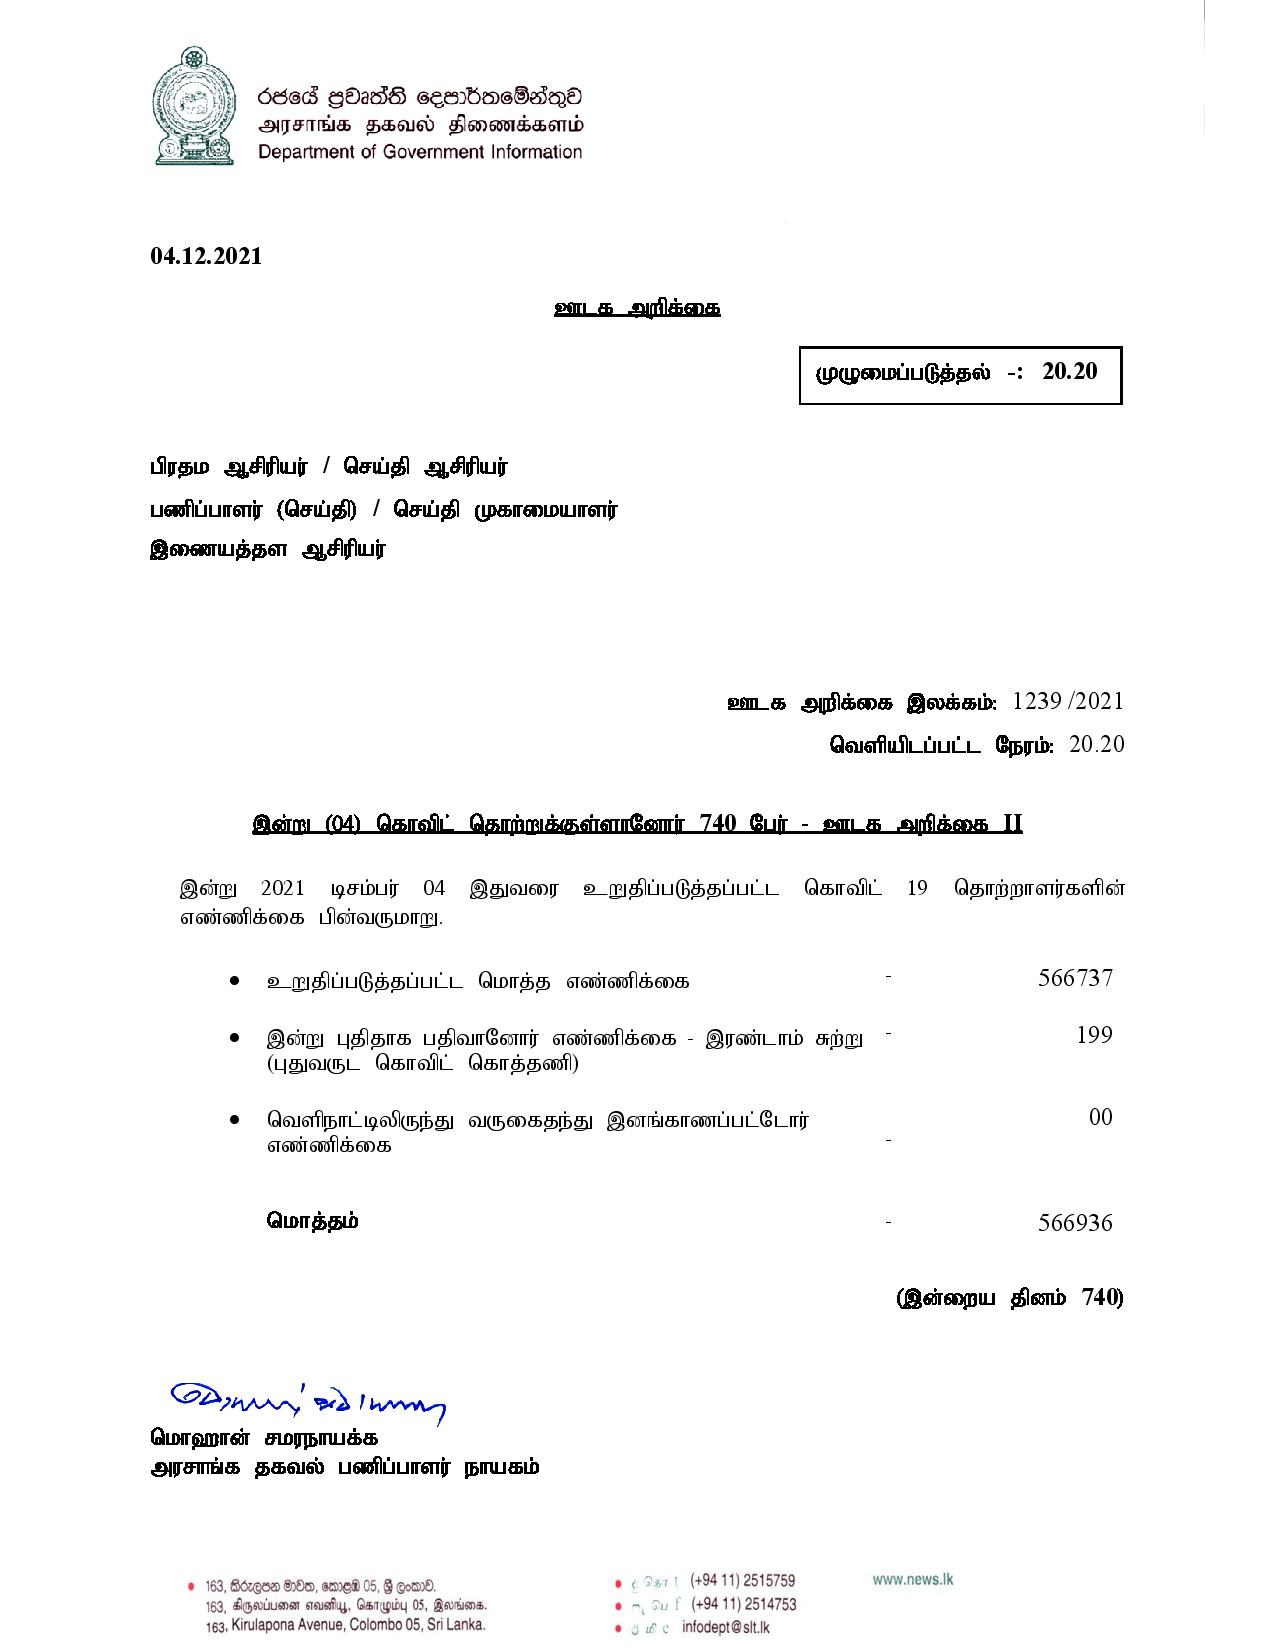 Release No 1239 Tamil page 001